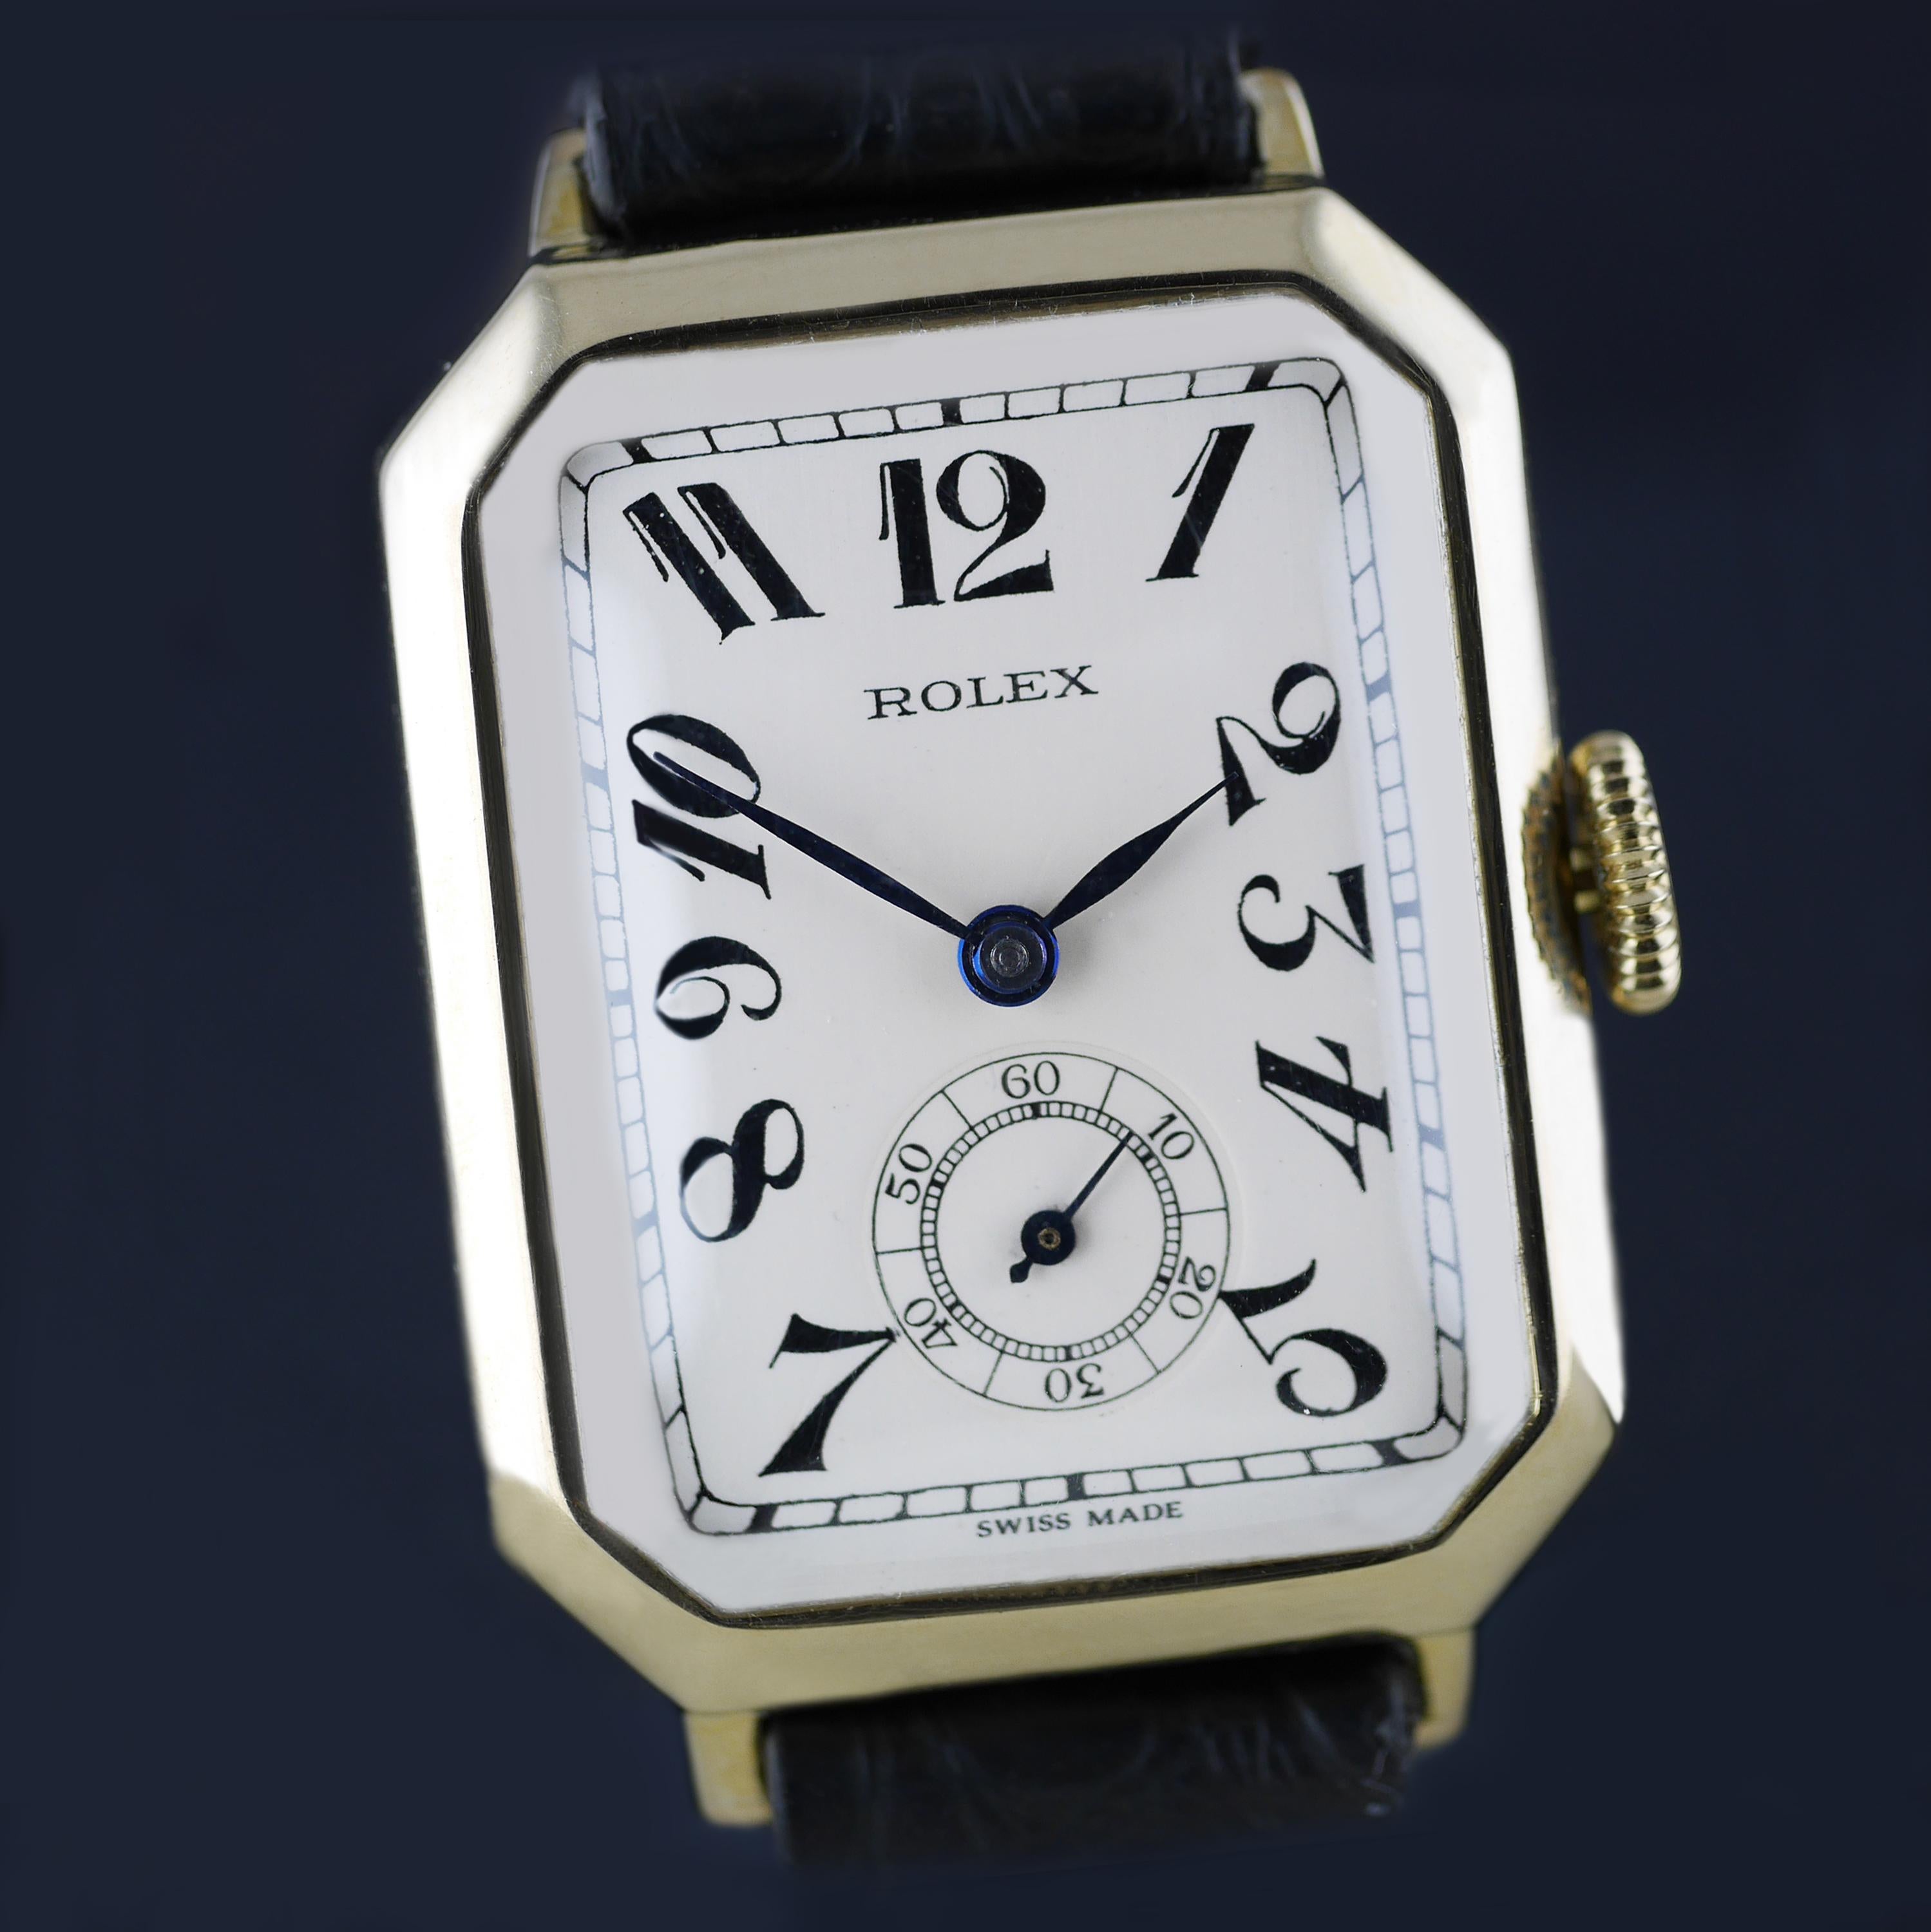 An Art Deco vintage wristwatch by Rolex made in 1933. This unusual and rare Rolex, with a distinctive shaped case, was made in the height of the Art Deco era. 

Gold rectangular shaped case marked with the “RWC Ltd” lozenge for the Rolex Watch